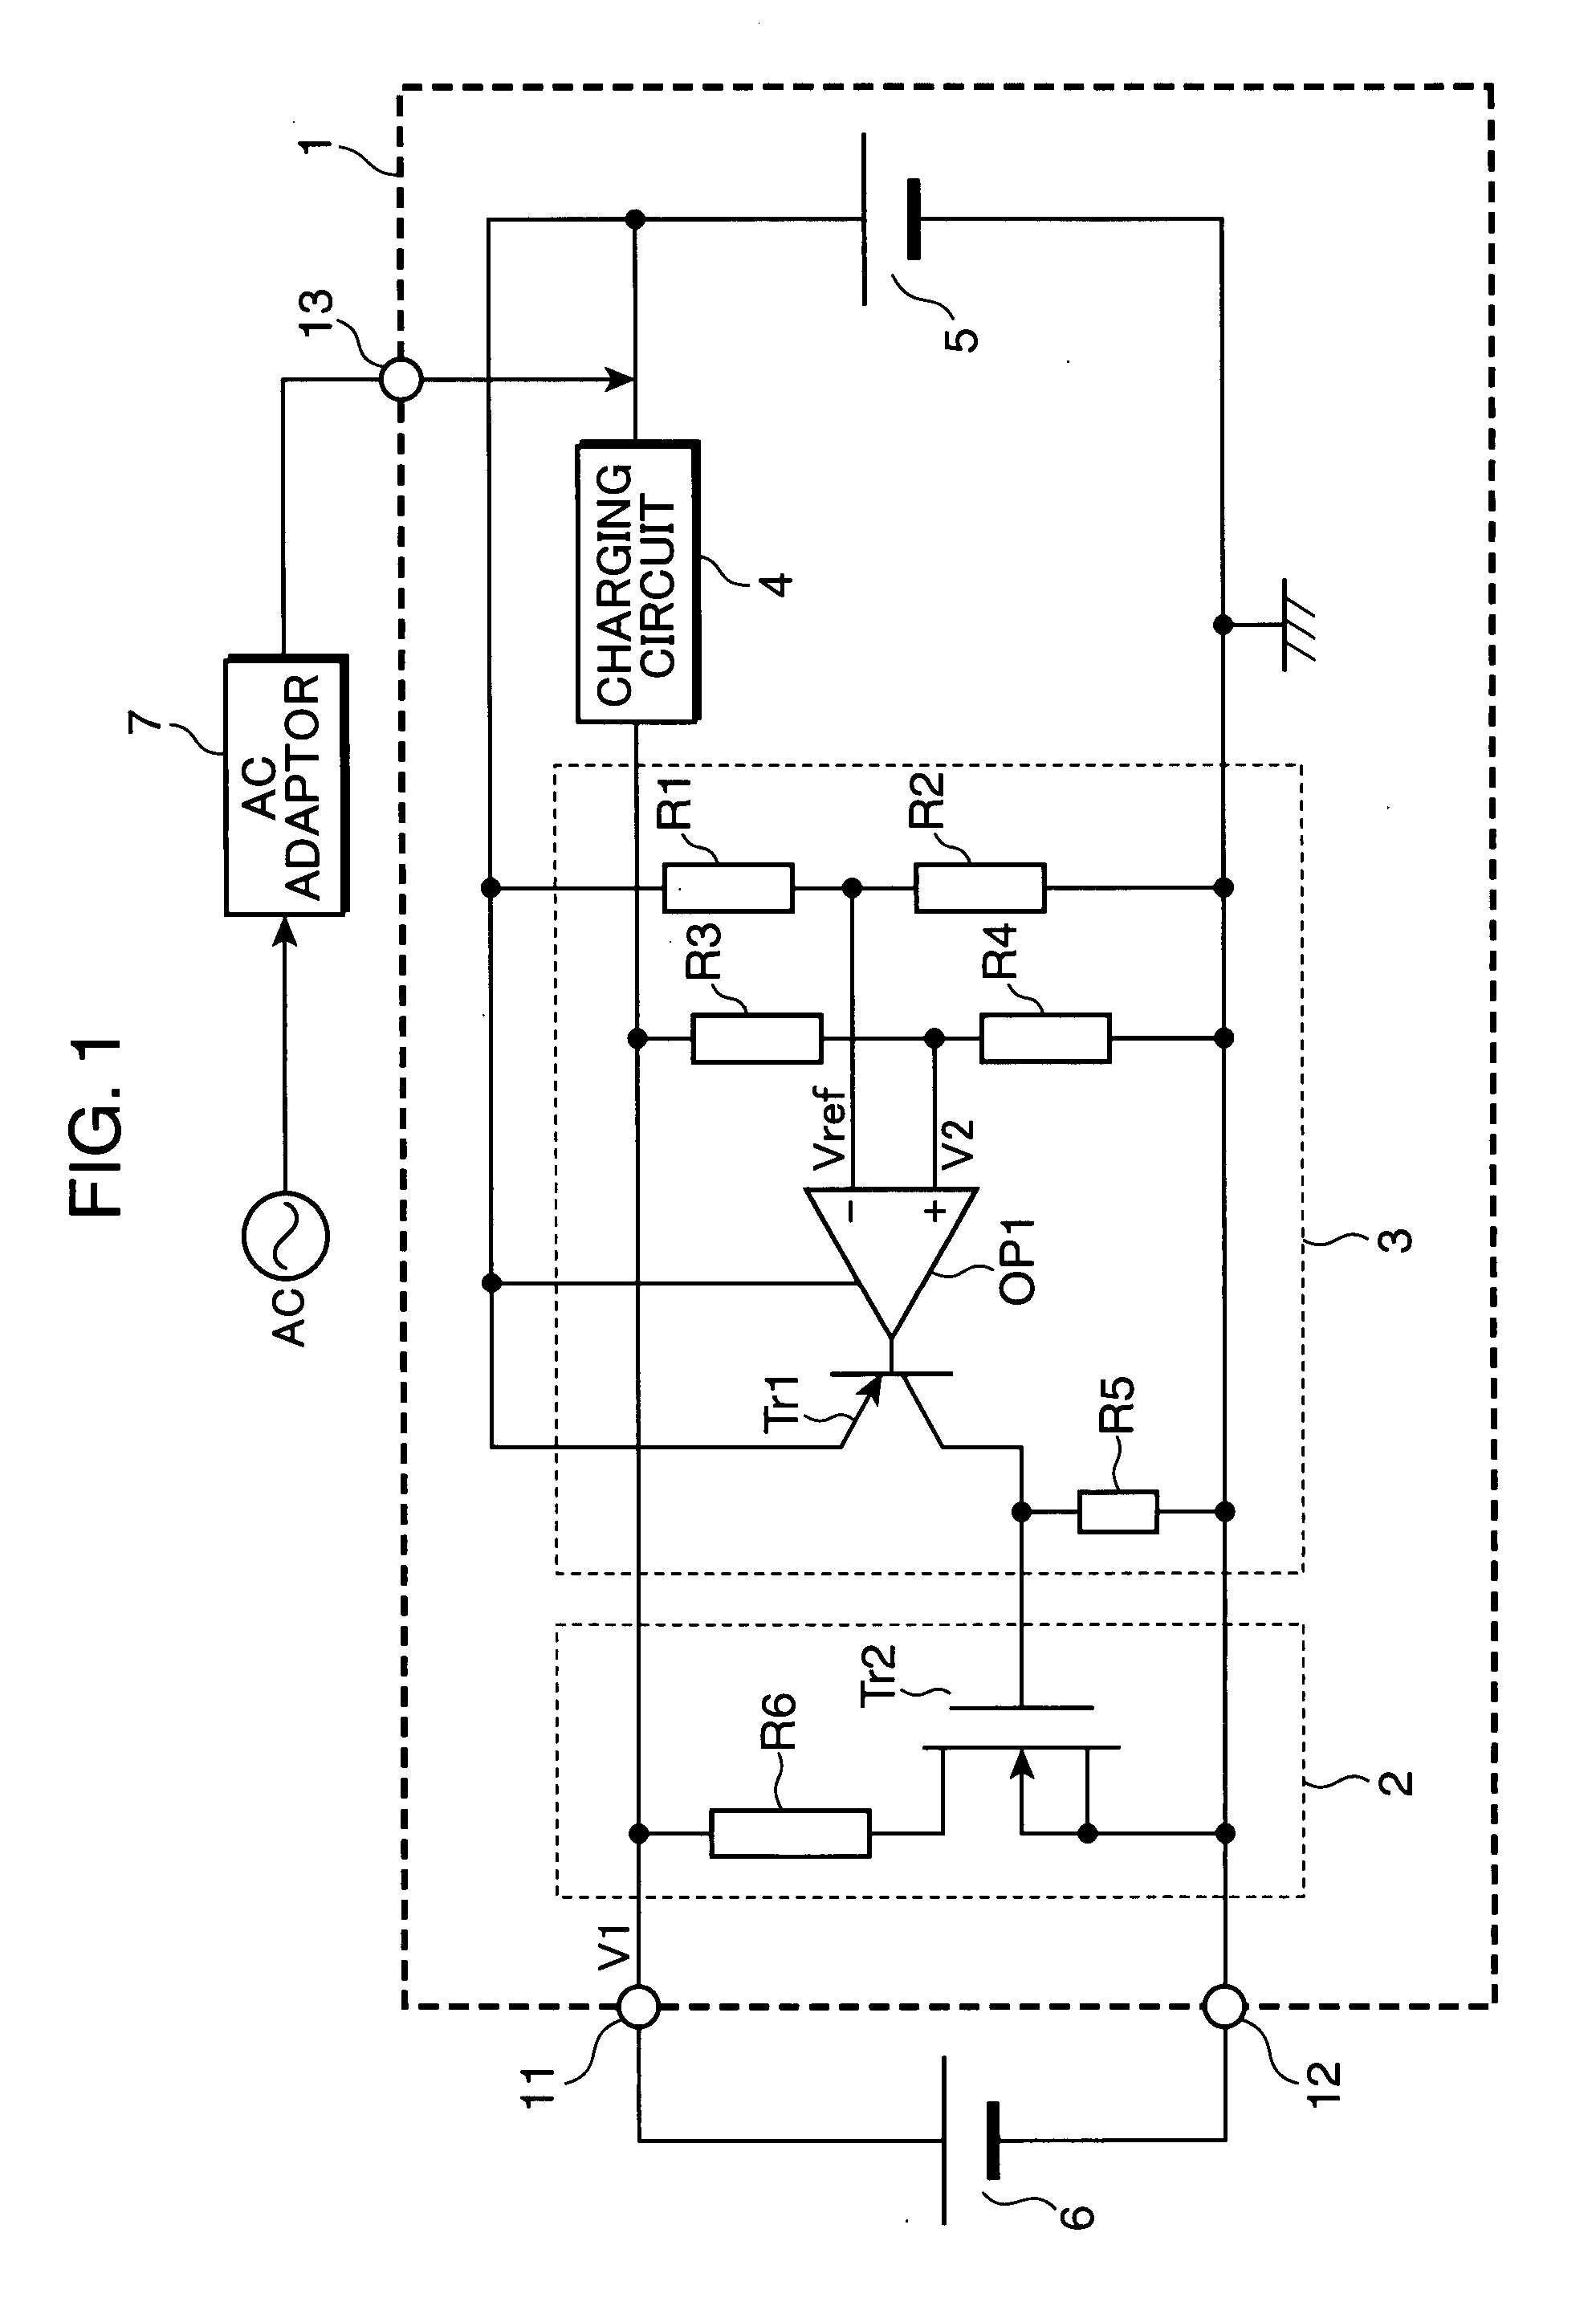 Electrical device and battery pack